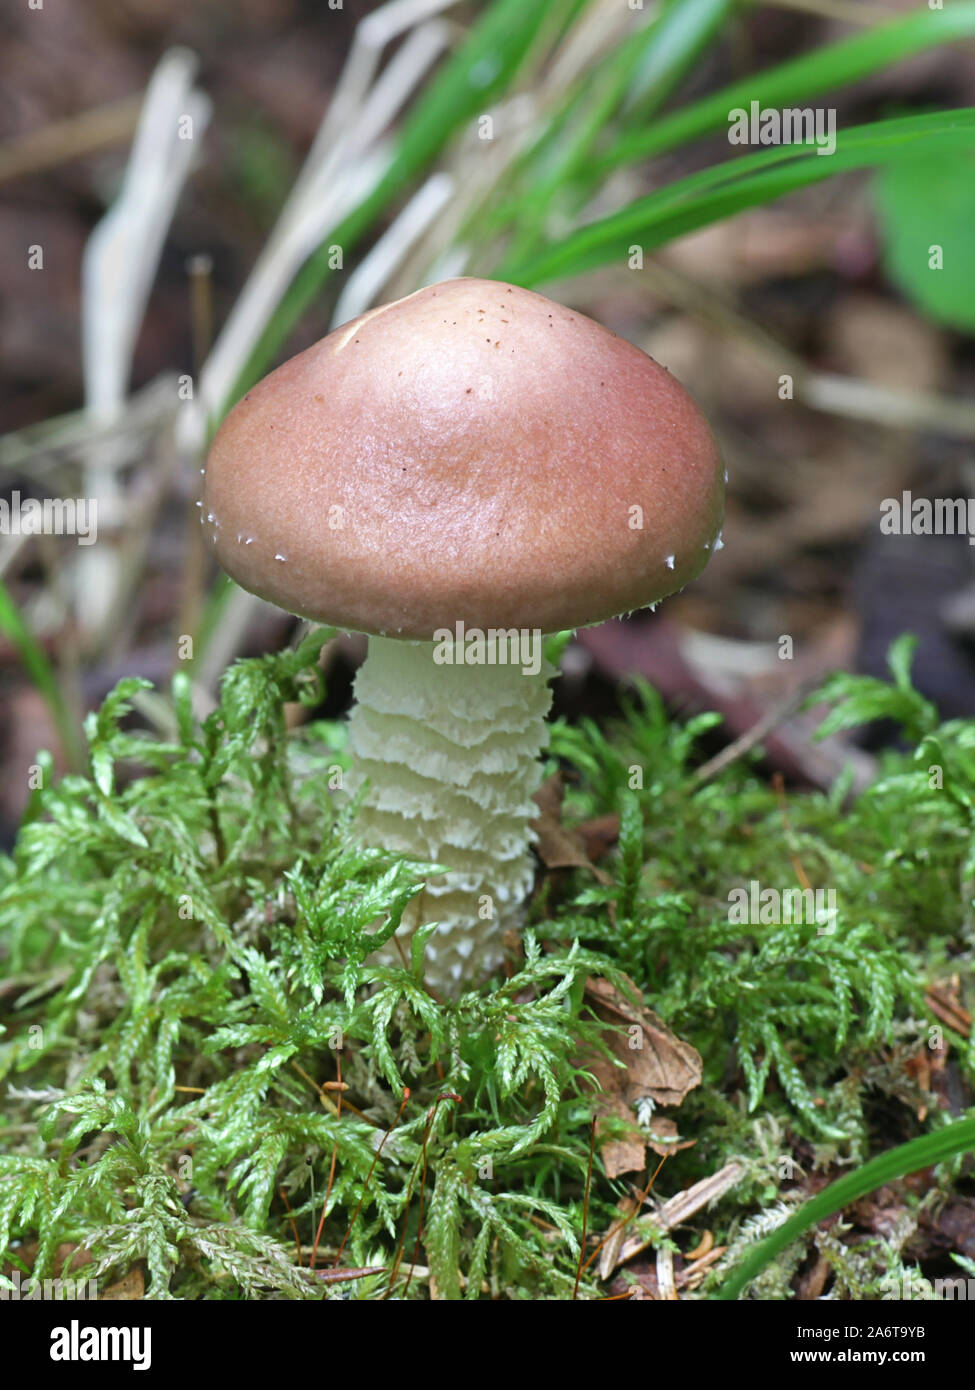 Stropharia hornemannii, known as luxuriant ringstalk, Conifer Roundhead and lacerated stropharia, wild mushroom from Finland Stock Photo